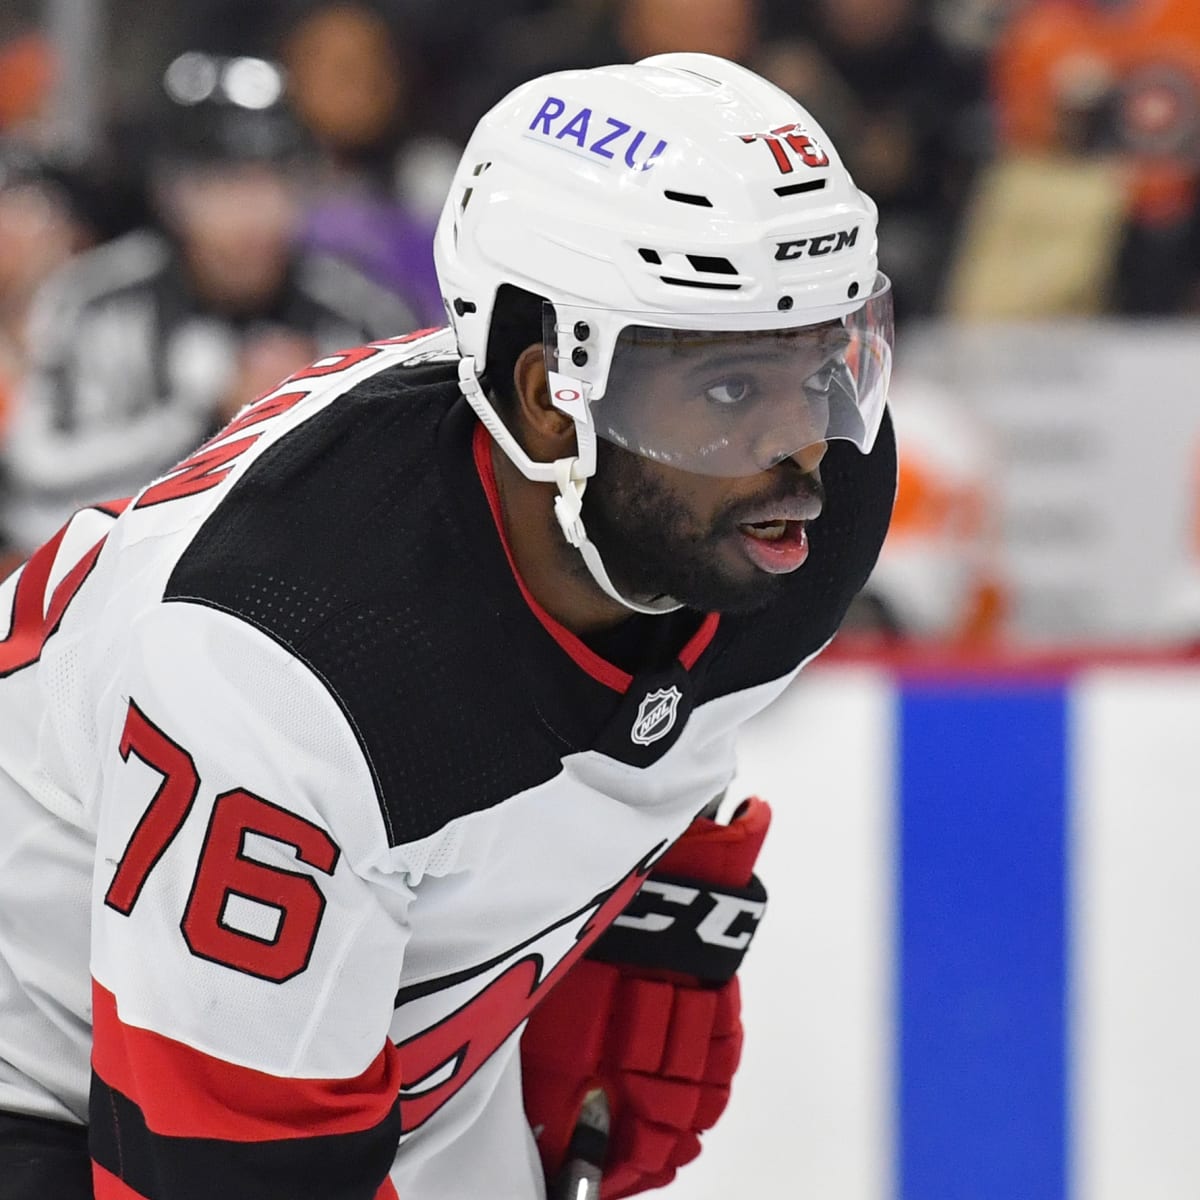 NHL star P.K. Subban says he's 'embarrassed' for hockey following monkey  taunts aimed at his brother - TheGrio